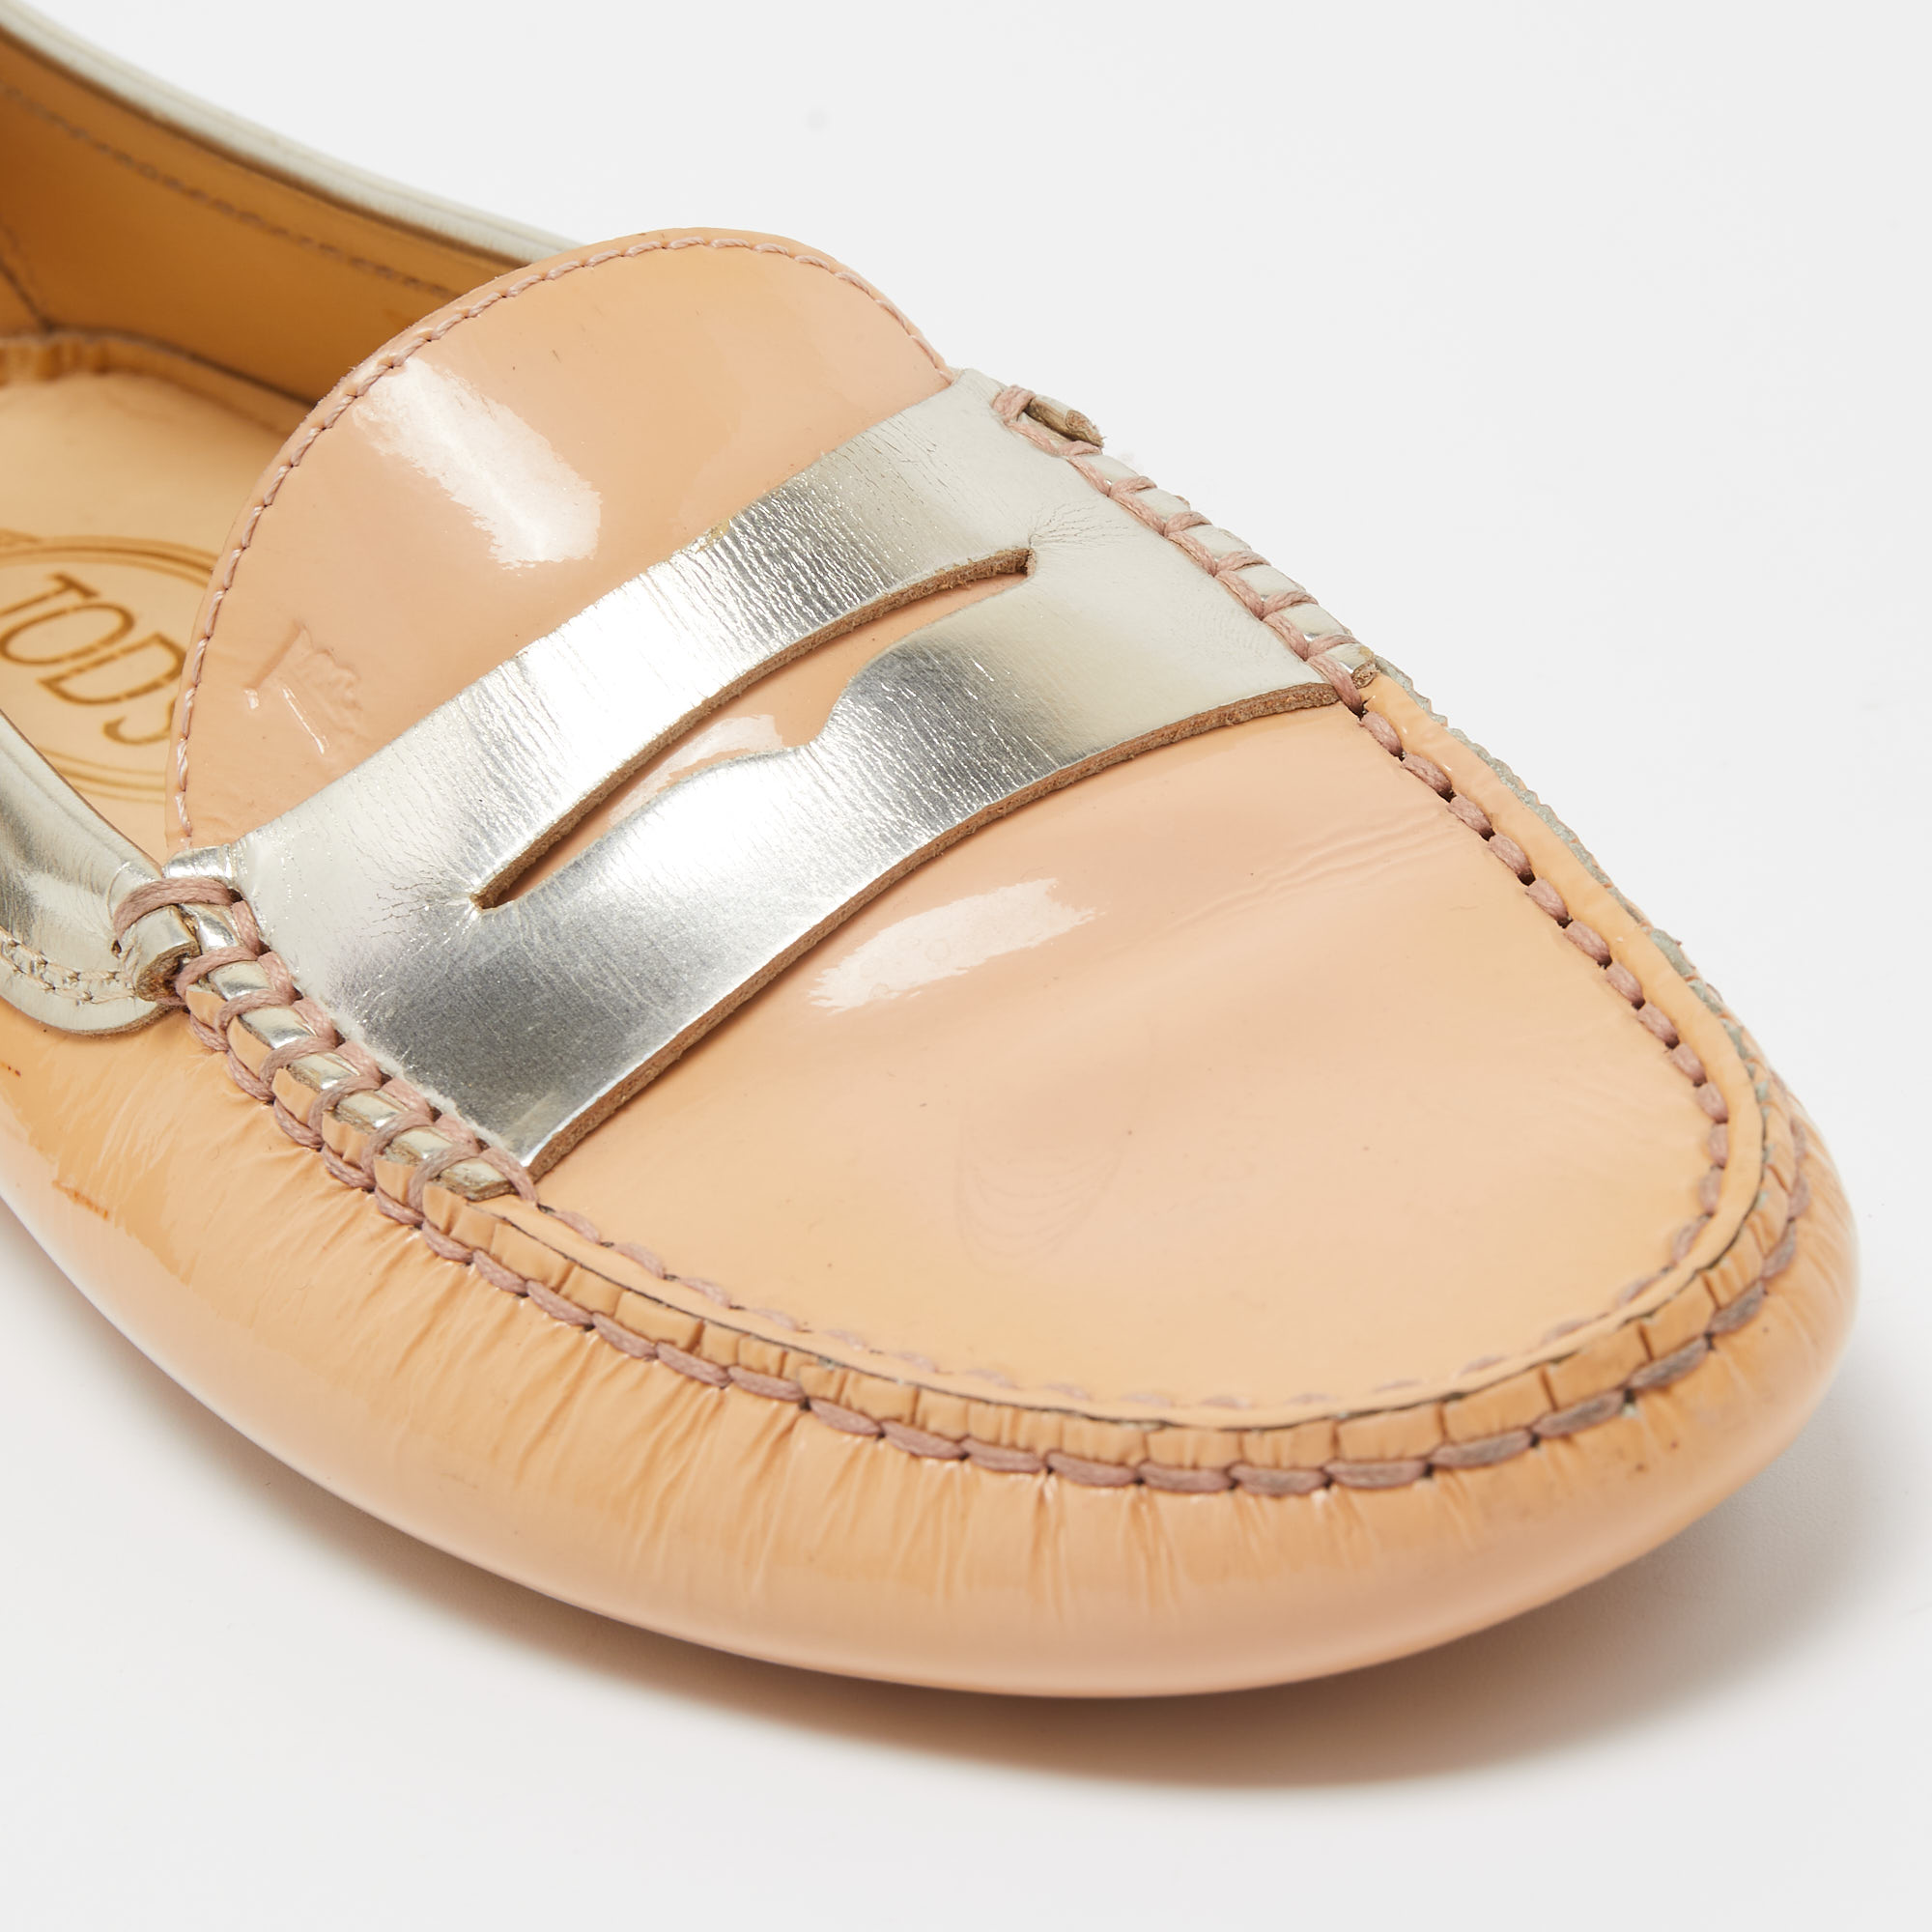 Tod's Beige/Gold Patent Leather Penny Slip On Loafers Size 38.5